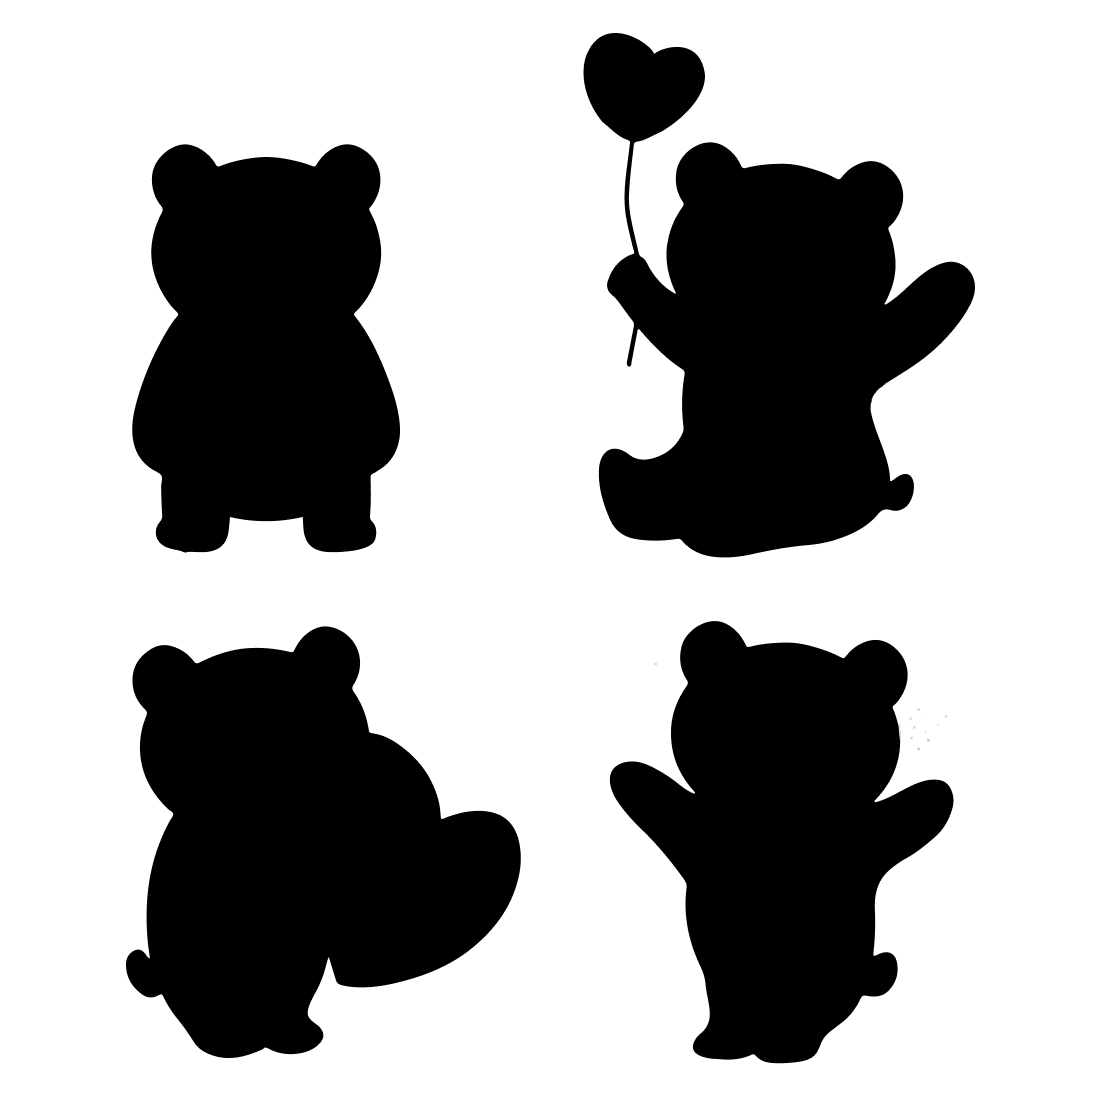 Set of four silhouettes of a teddy bear holding a heart shaped balloon.